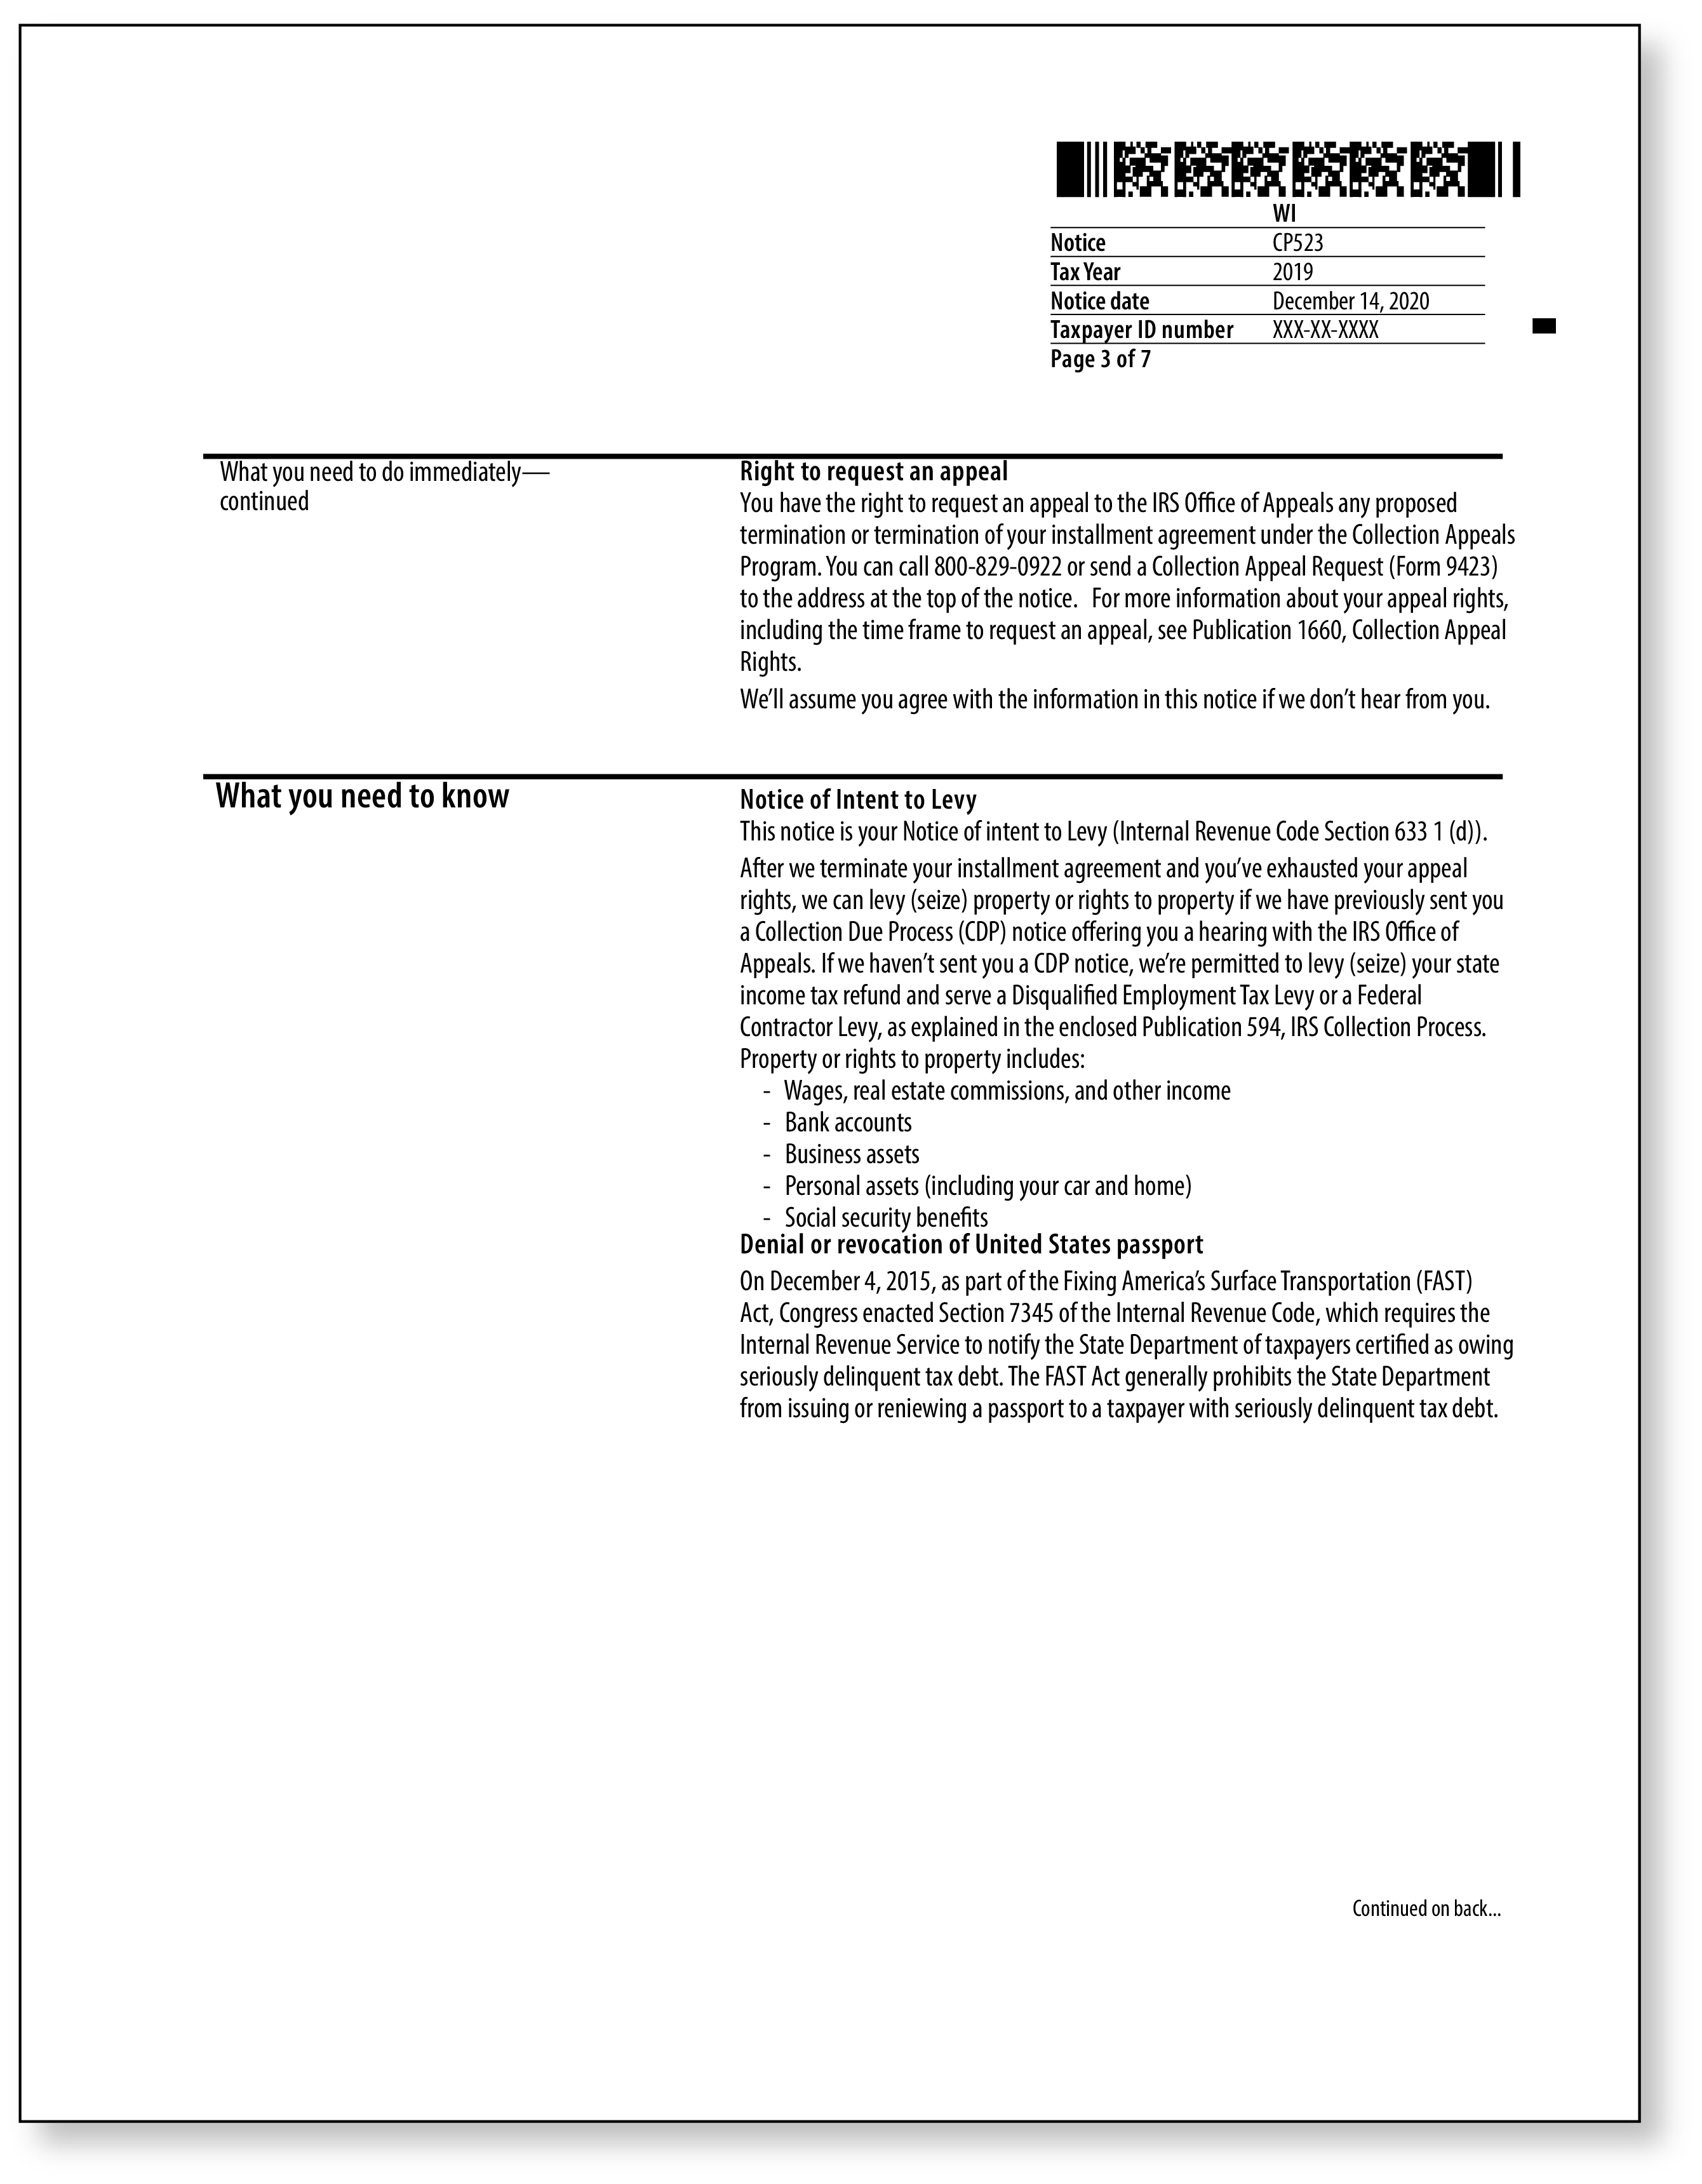 IRS Audit Letter CP523 – Sample 1